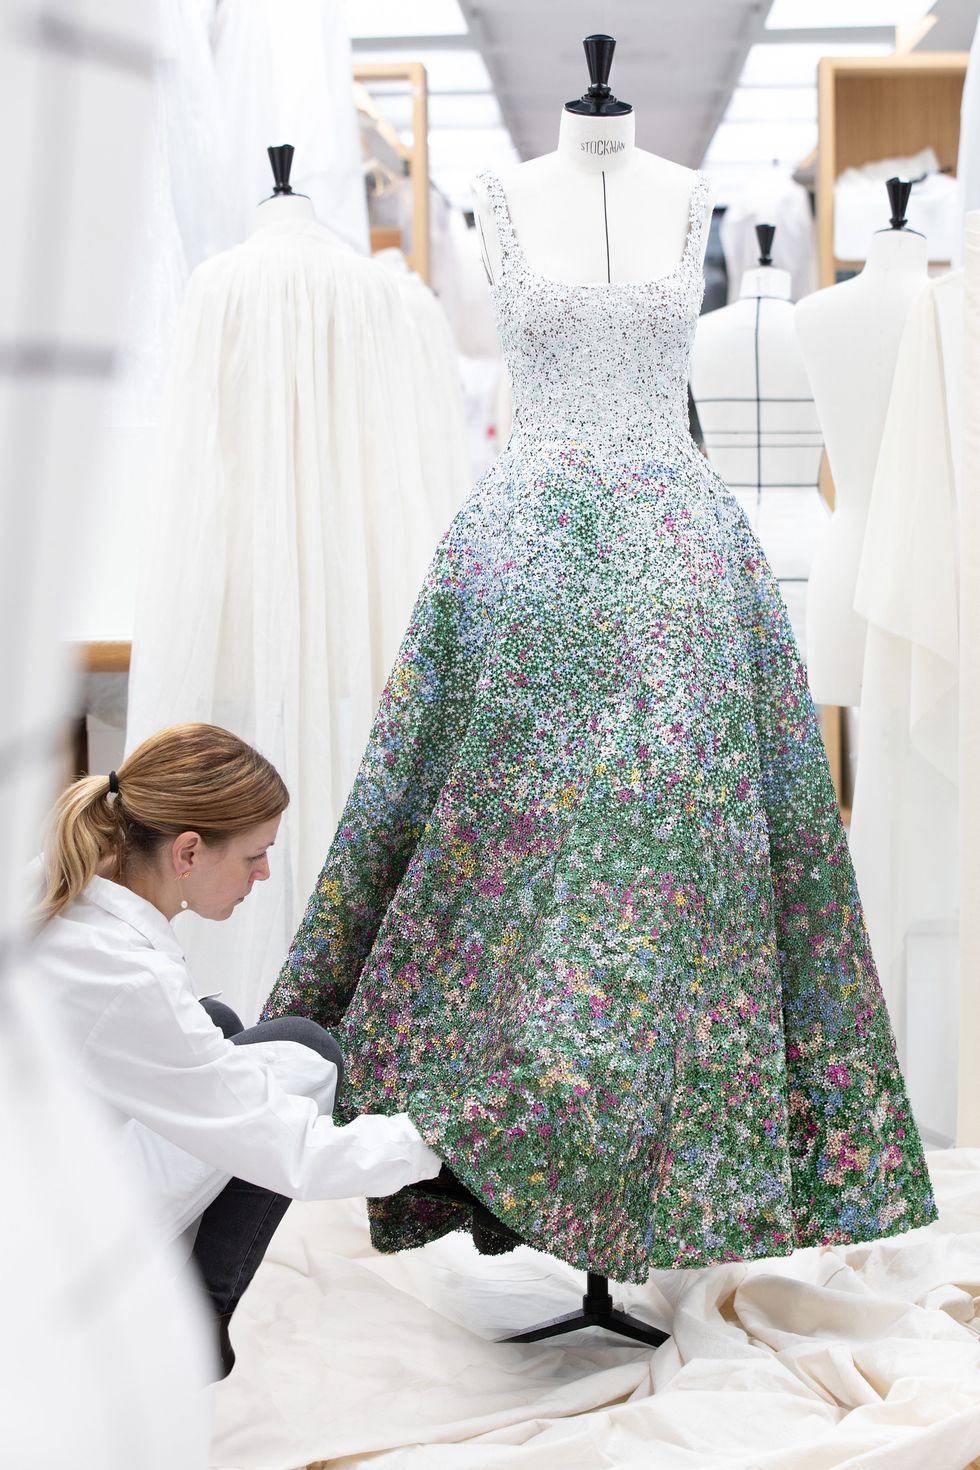 The Making of Natalie Portman's Dior Golden Globes Gown